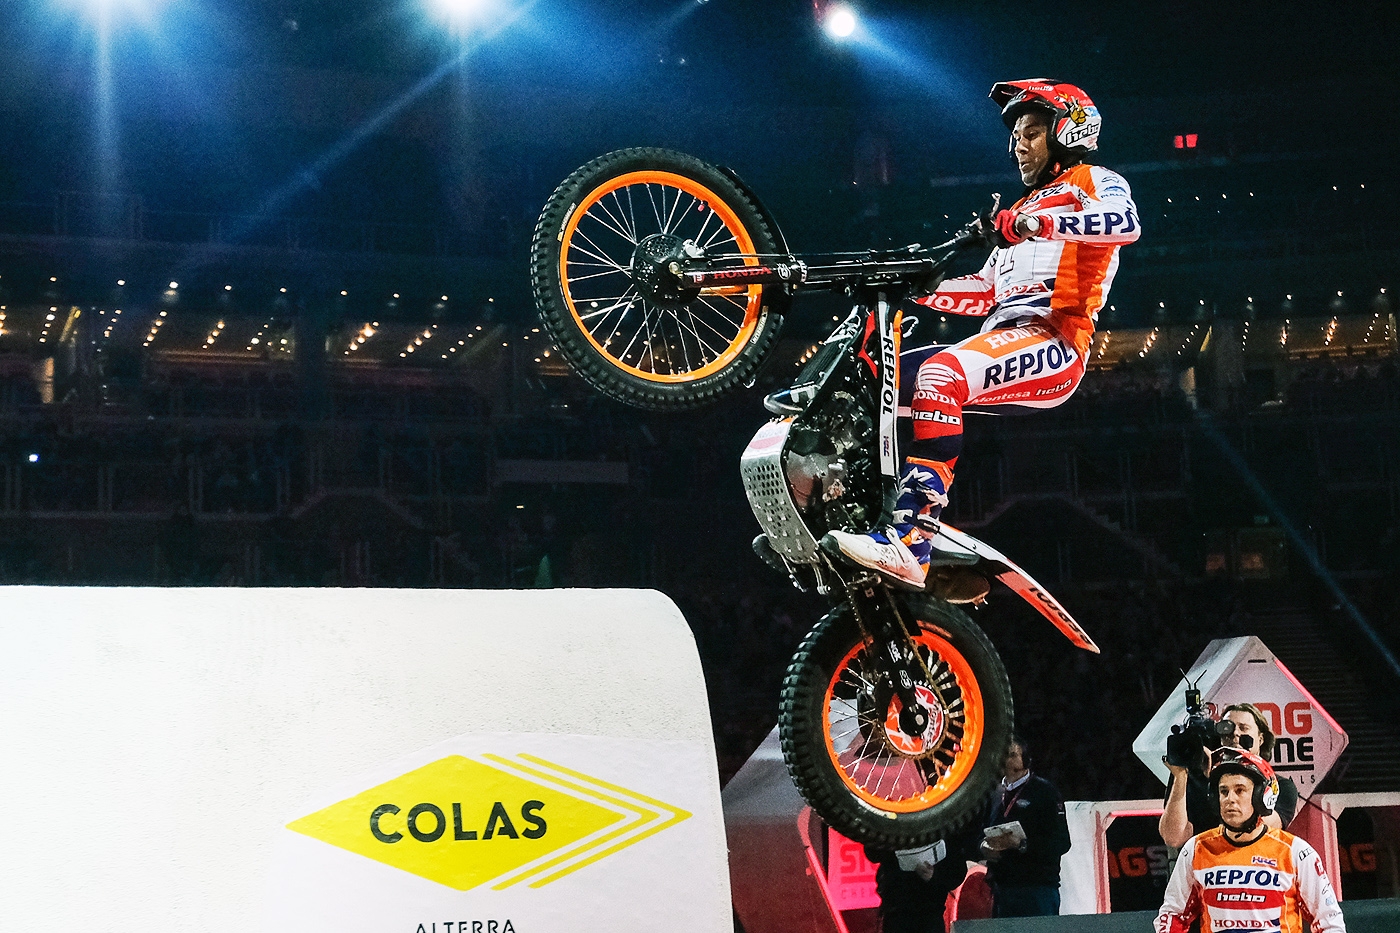 The stars of X-Trial head to Barcelona on 3rd February